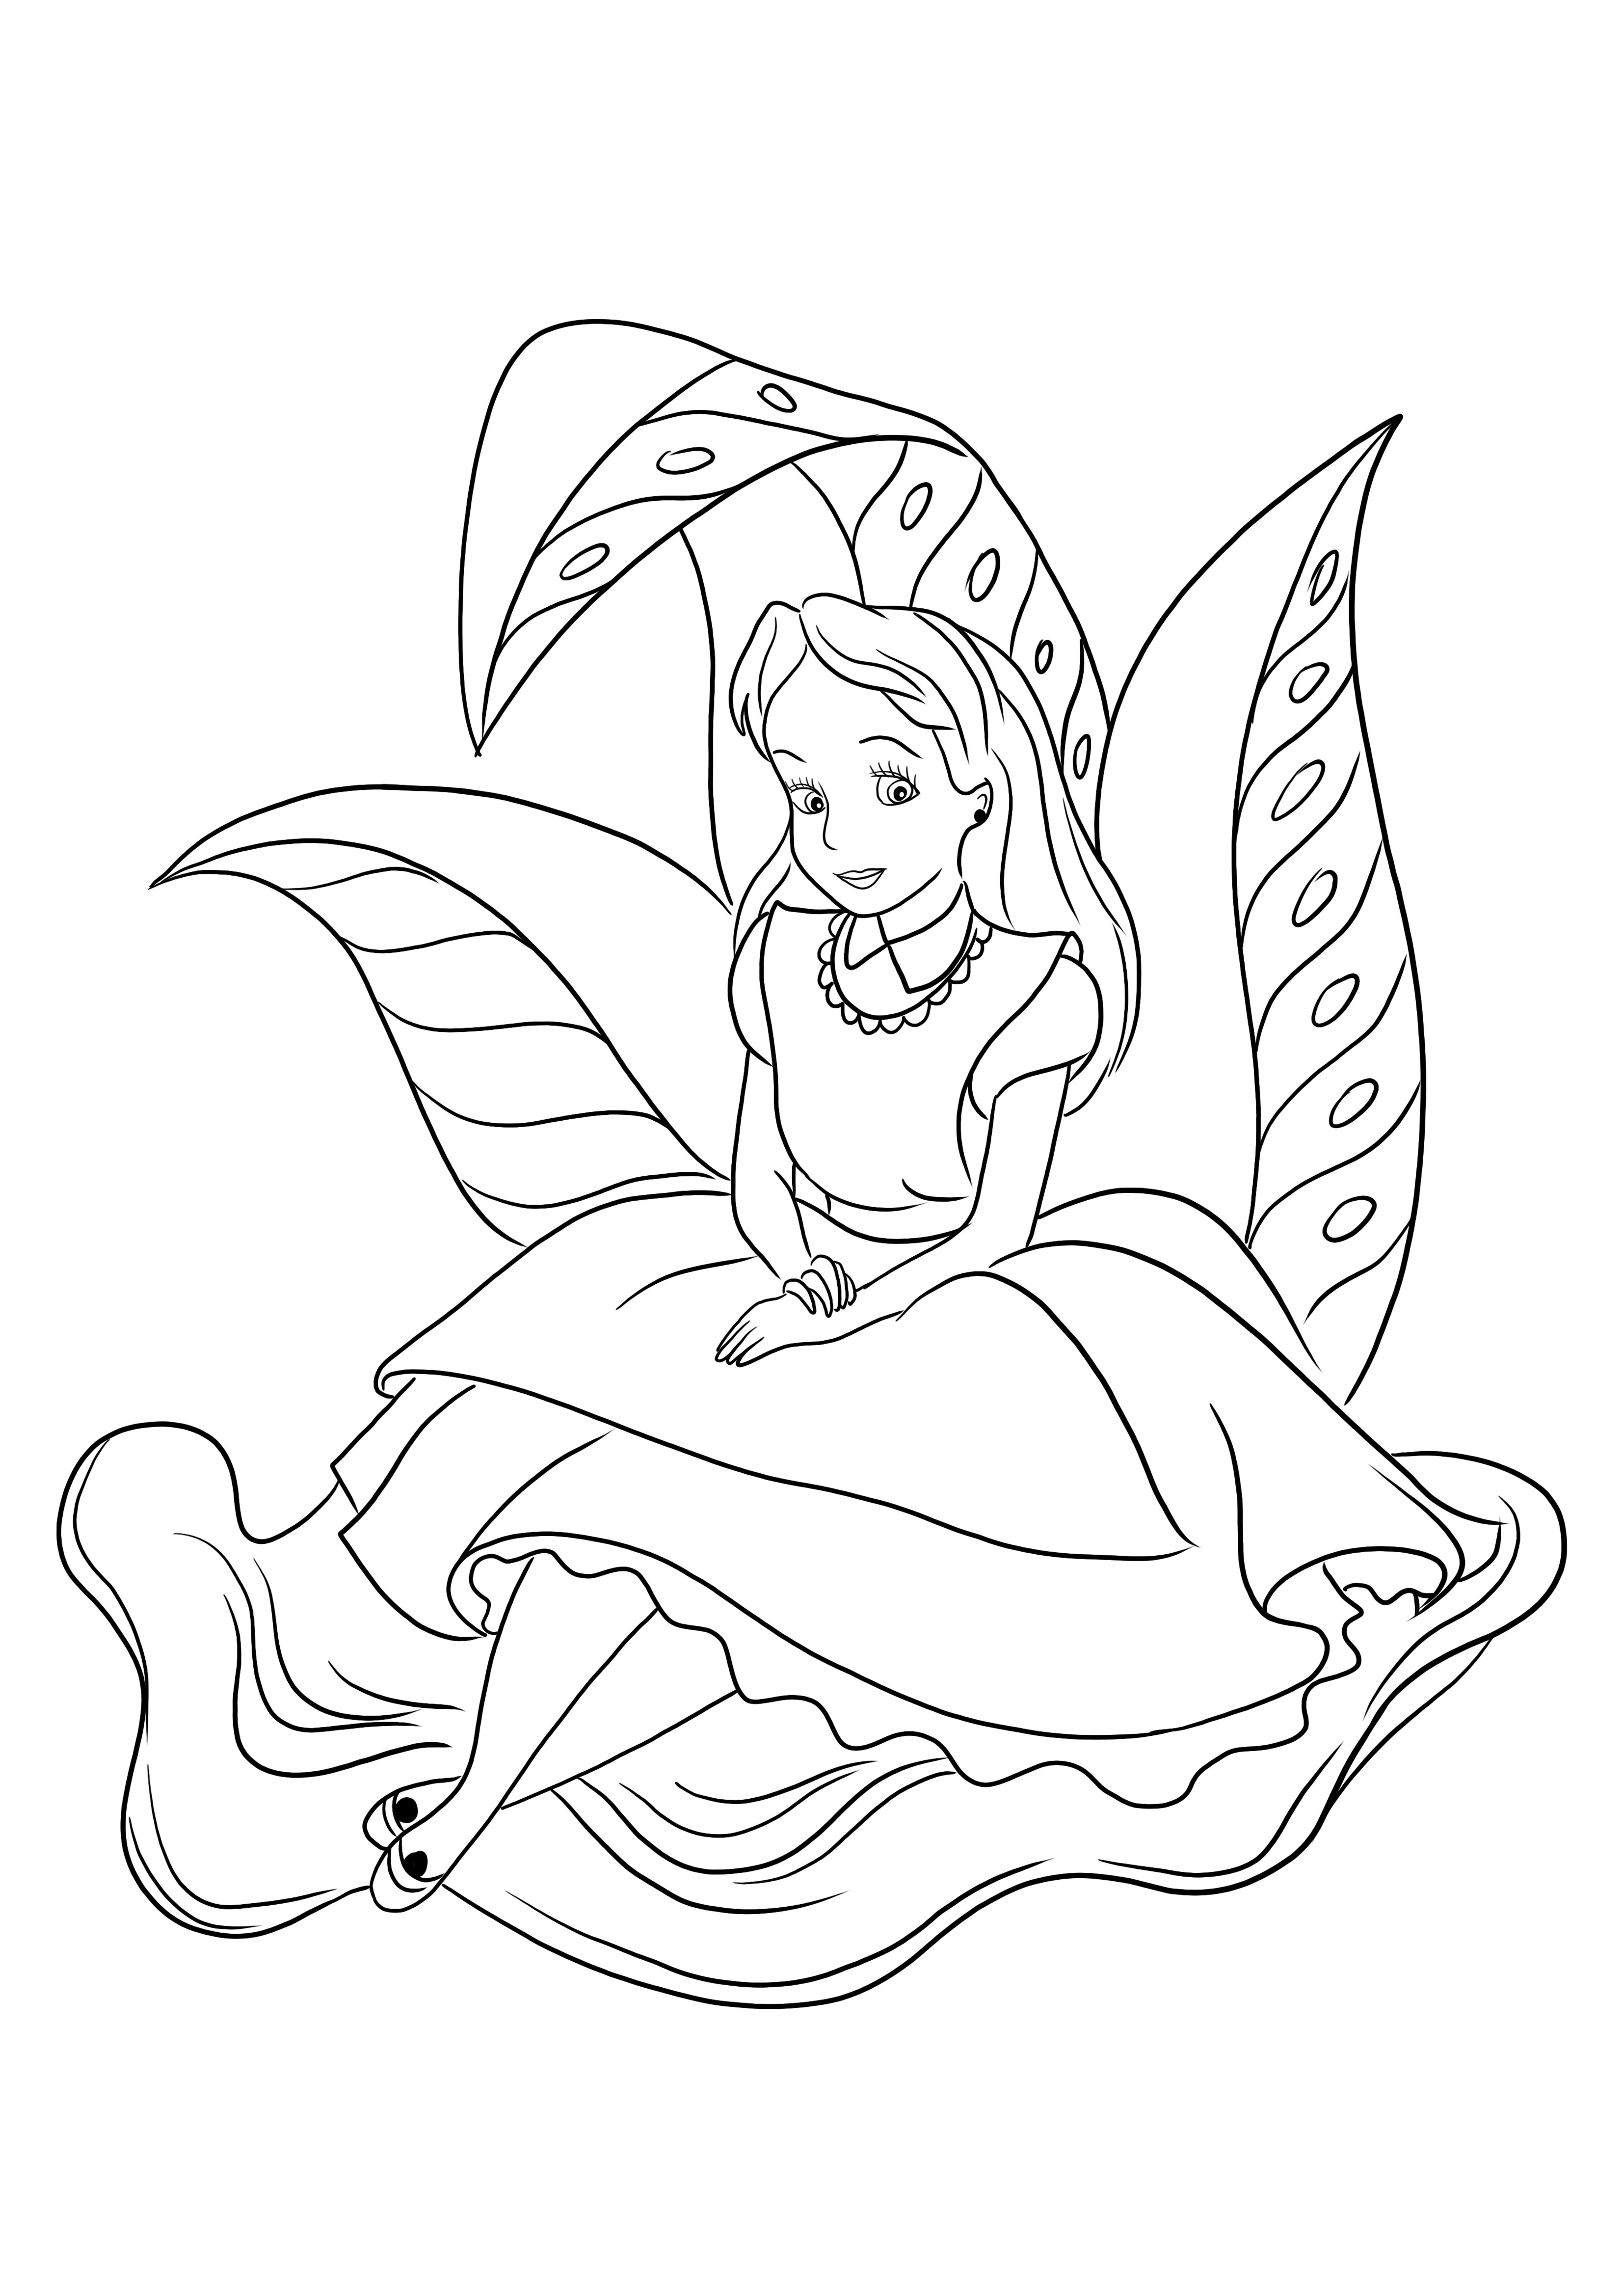 Here is a free coloring picture of Alice sitting on a giant leaf to print or download